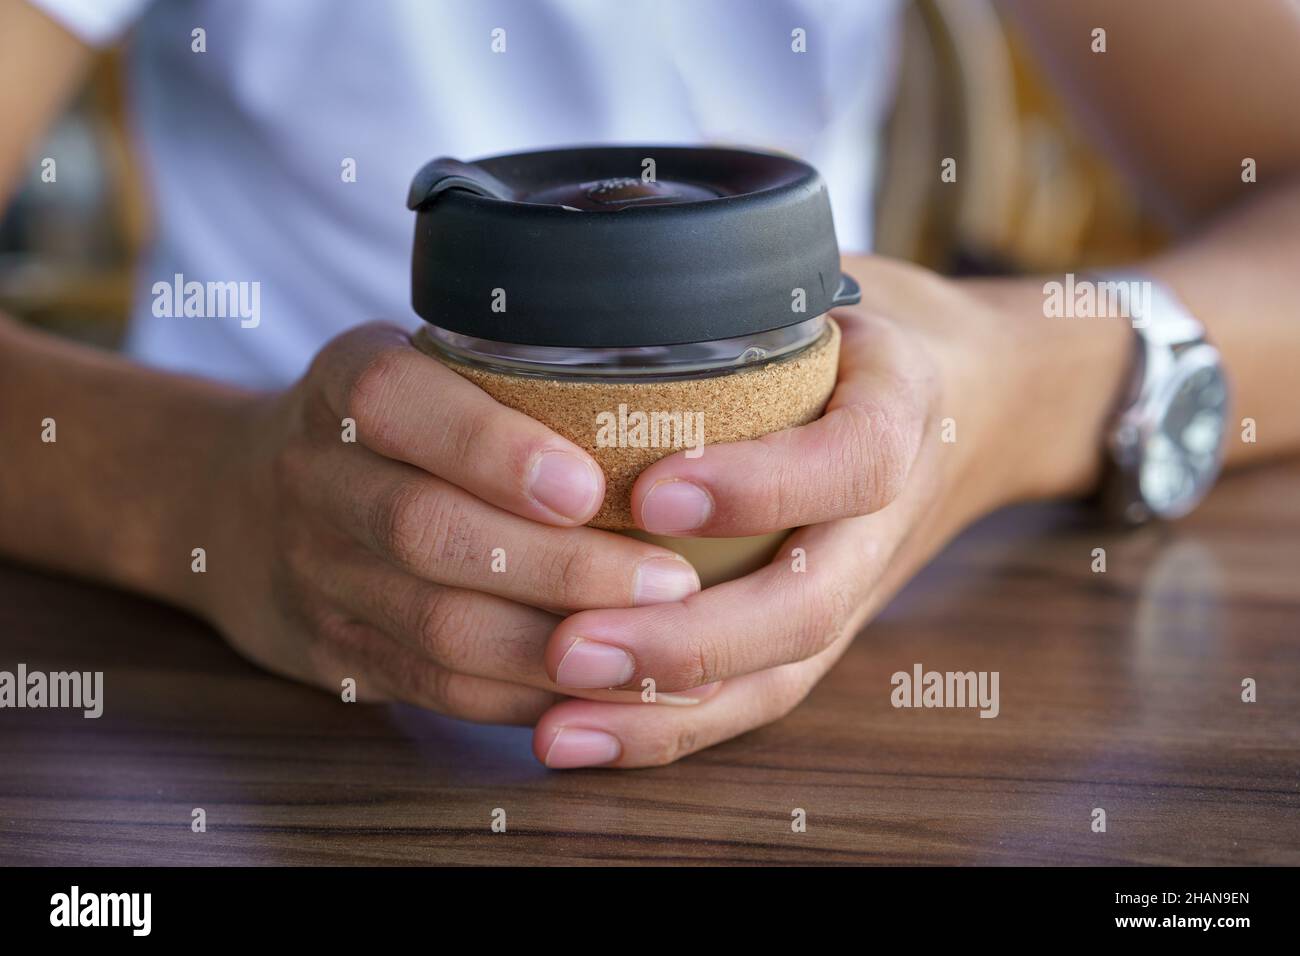 Male hands hold reusable coffee mug. Young man drink coffee from reusable travel coffee cup. Teenager holding reusable coffee mug. Sustainable lifestyle. Eco friendly concept. Stock Photo